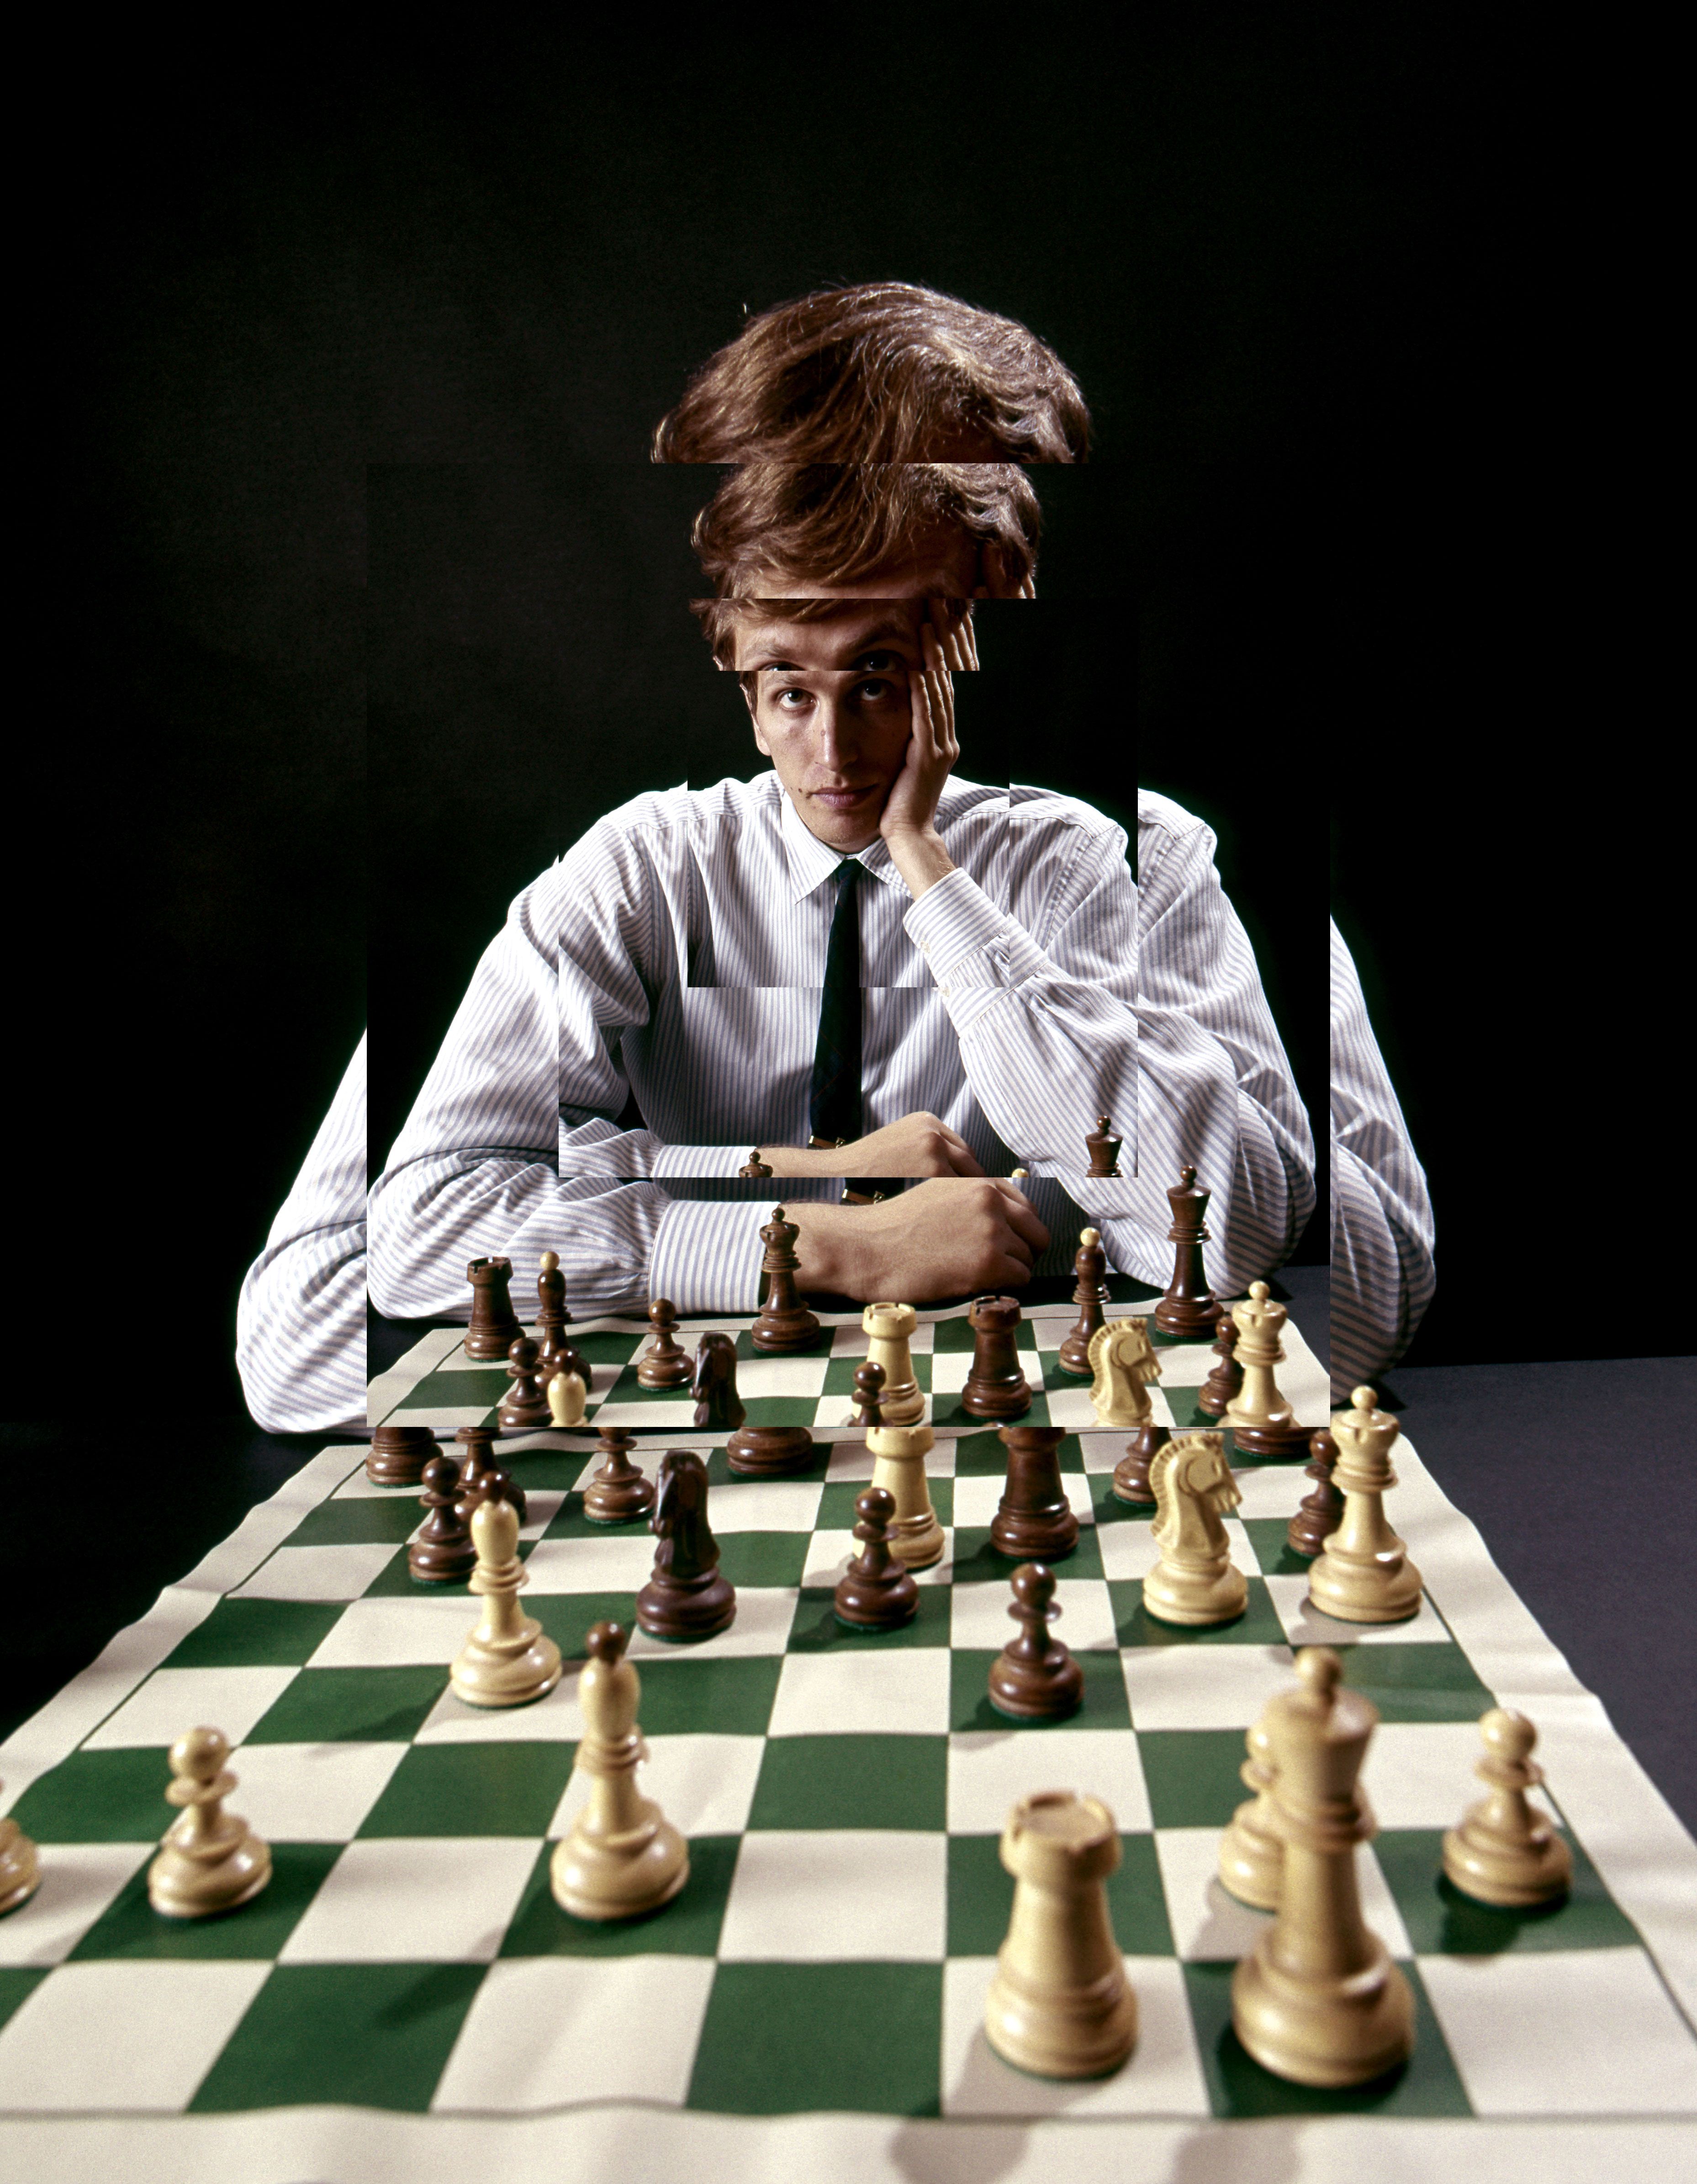 An open letter from: Bobby Fischer, the World Chess Champion to